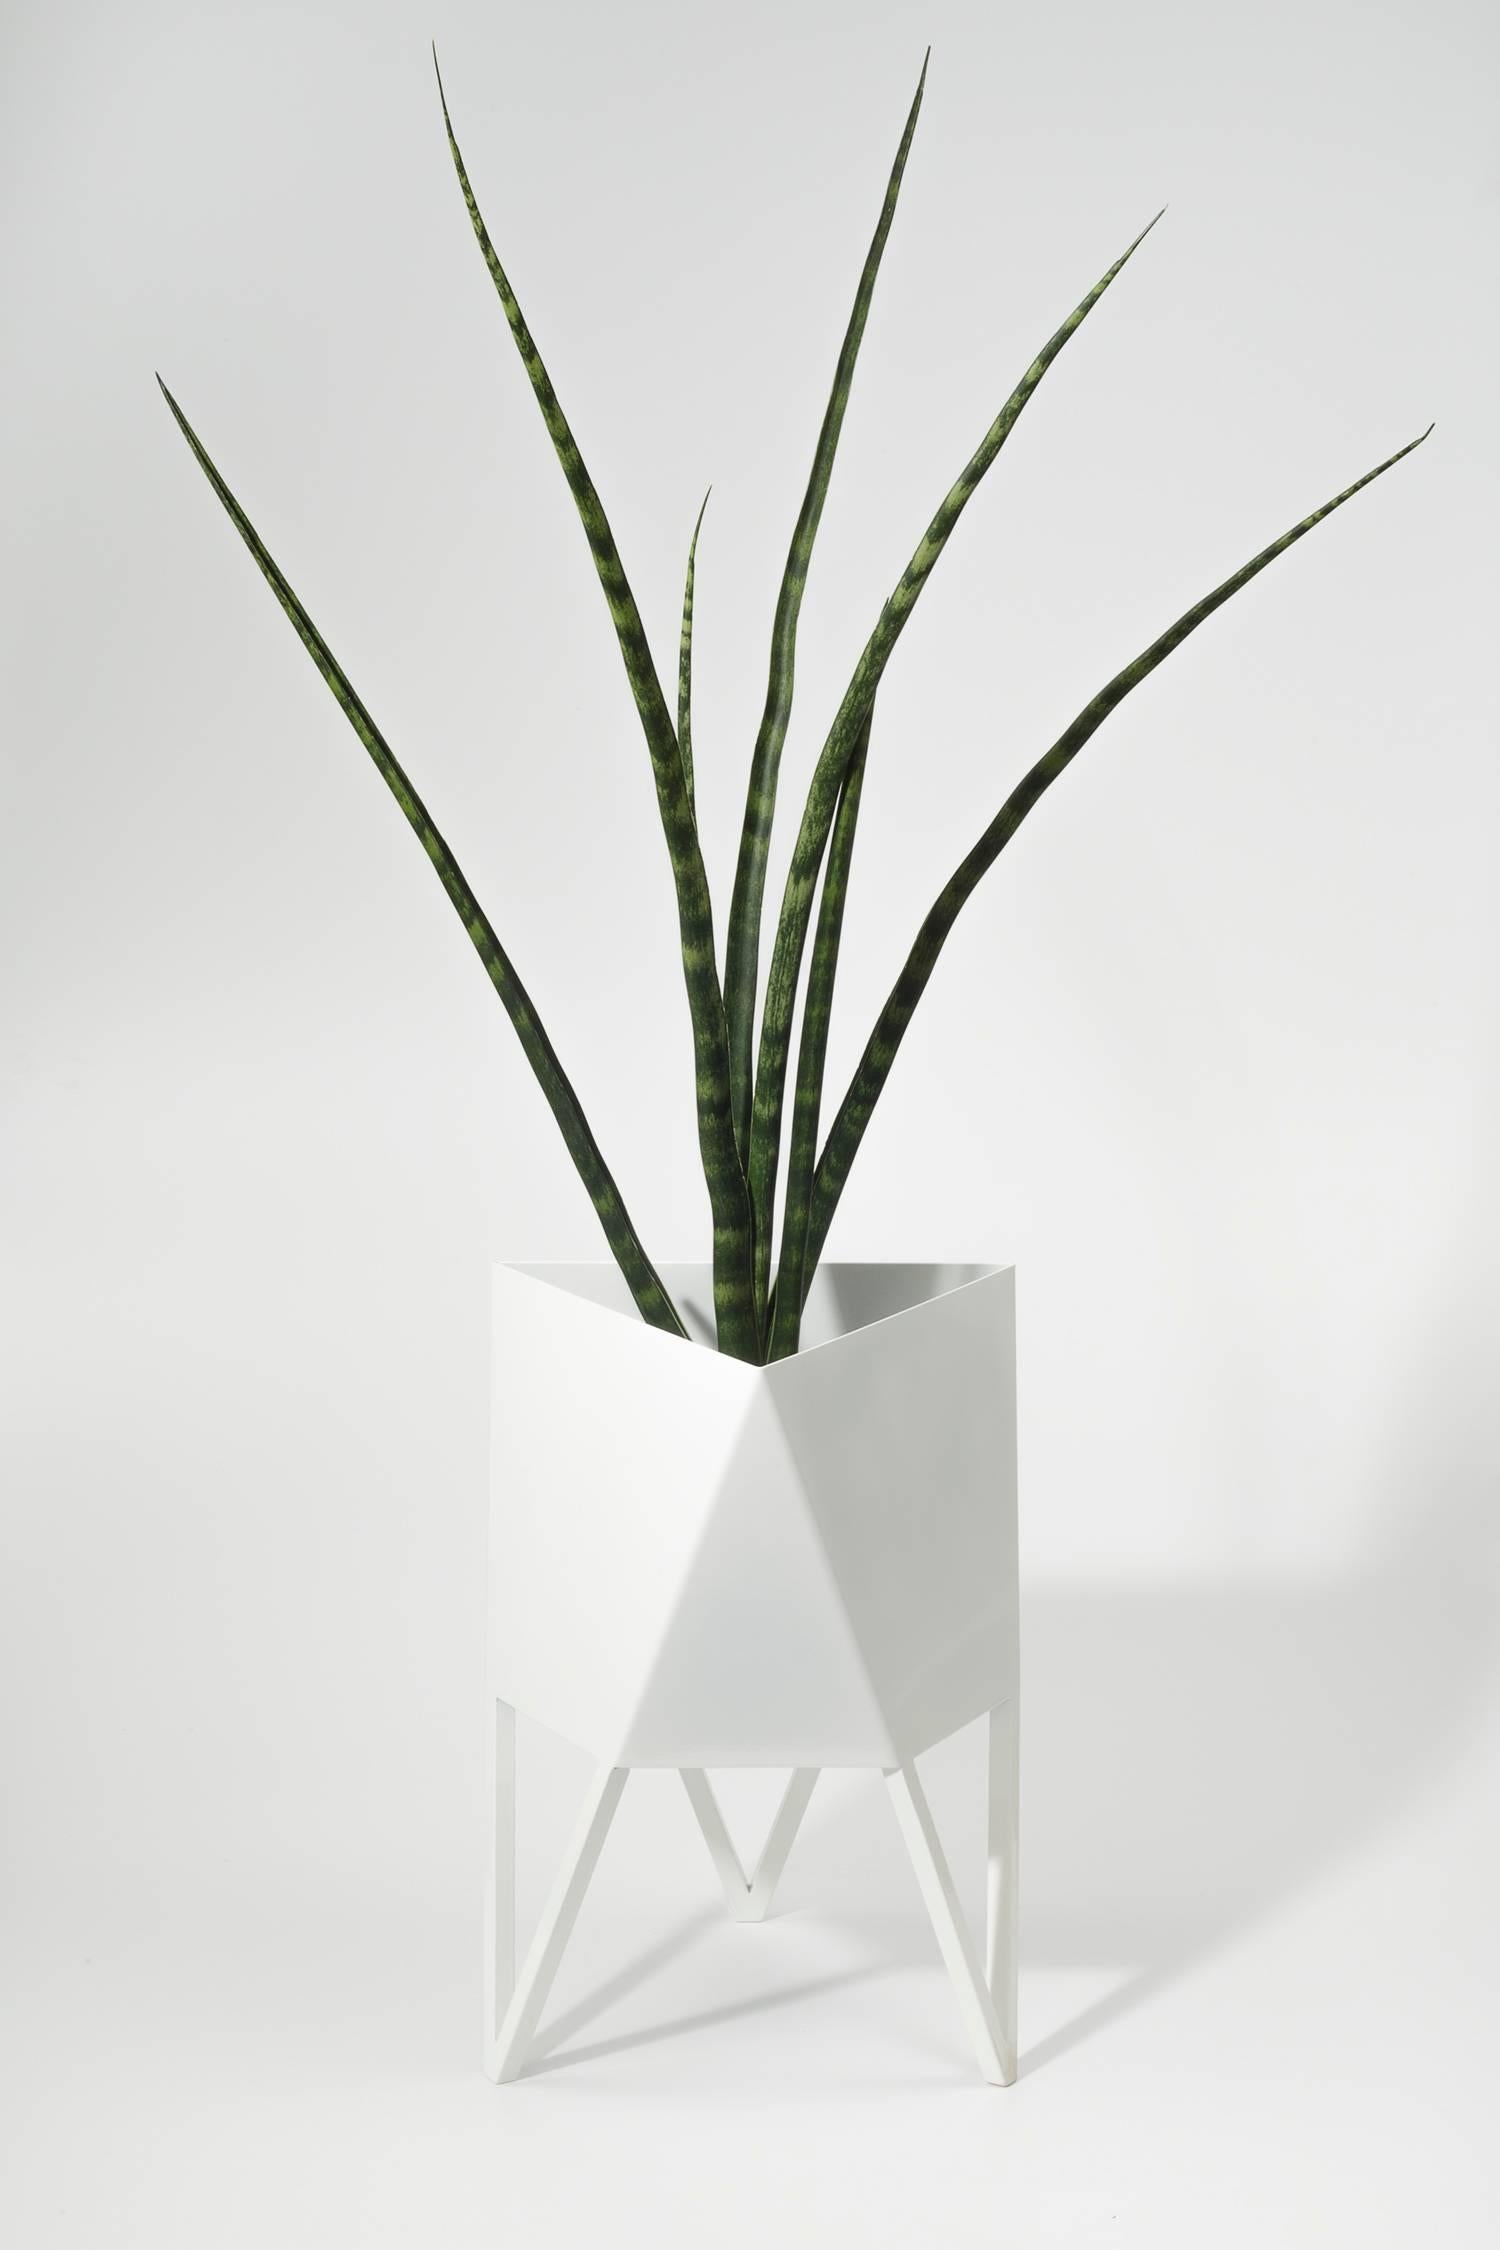 Large Deca Planter in Mint by Force/Collide, 2020 7